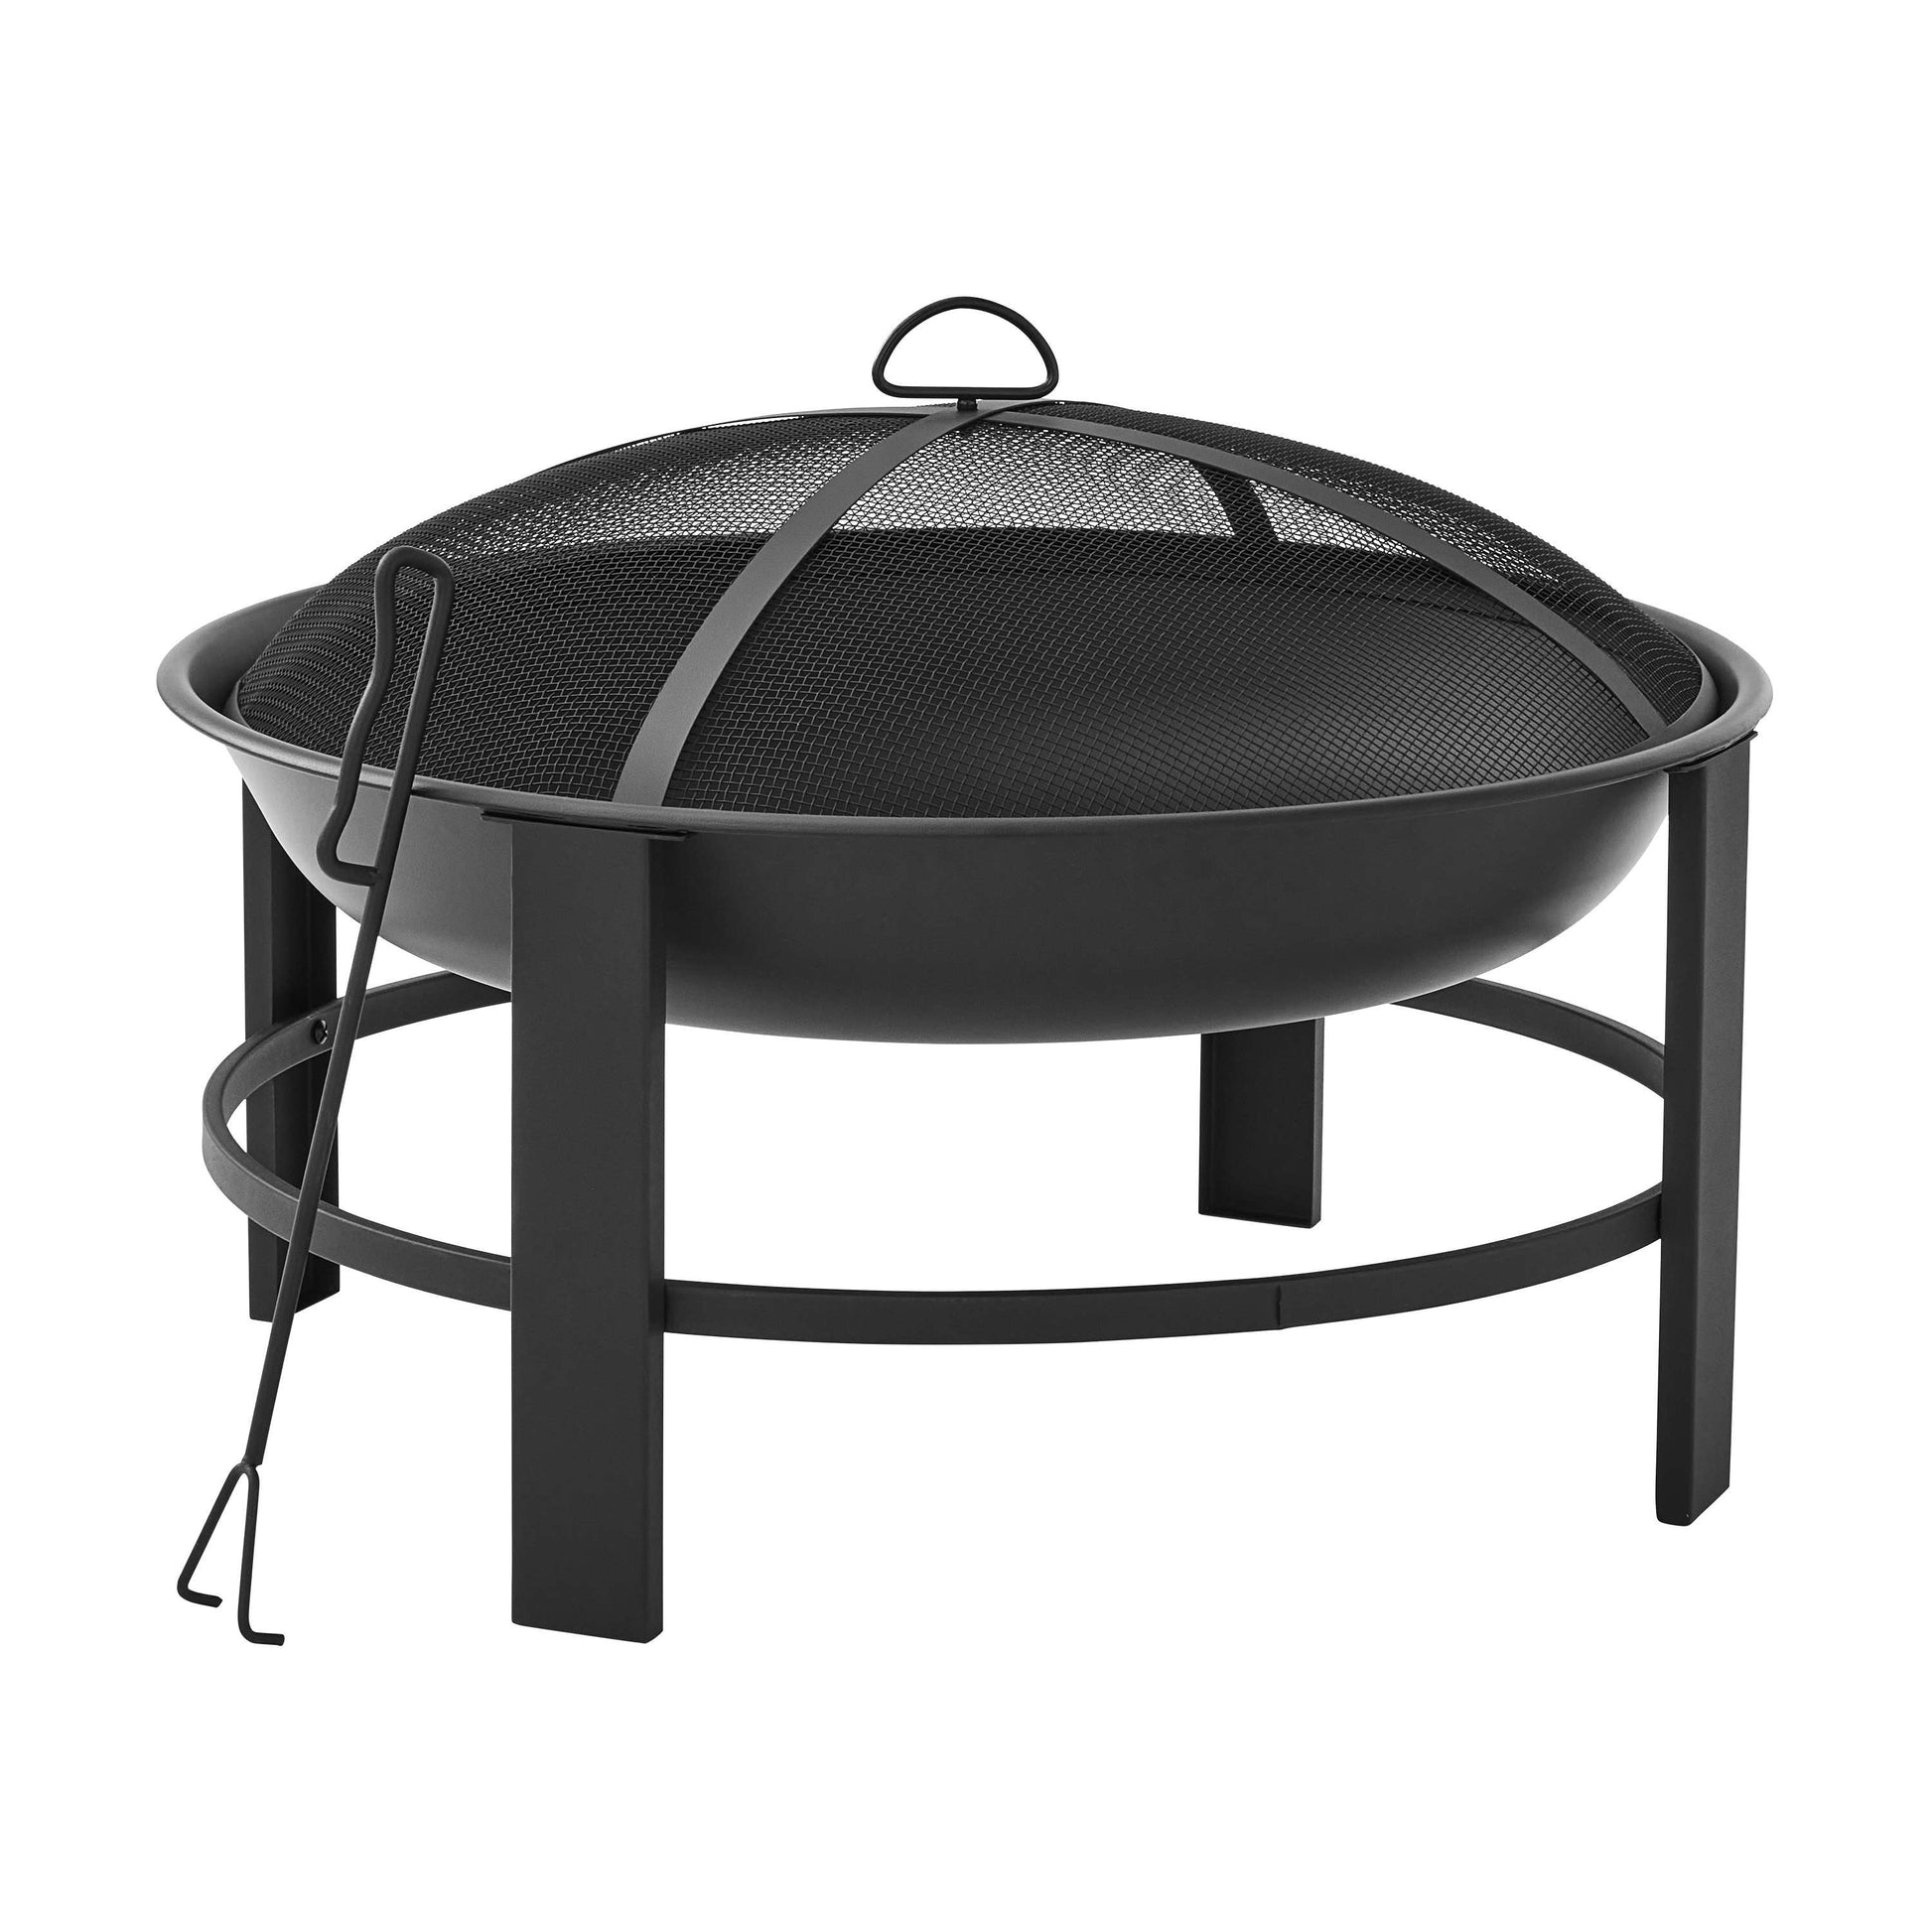 28" round Wood Burning Fire Pit, Steel Frame - Design By Technique